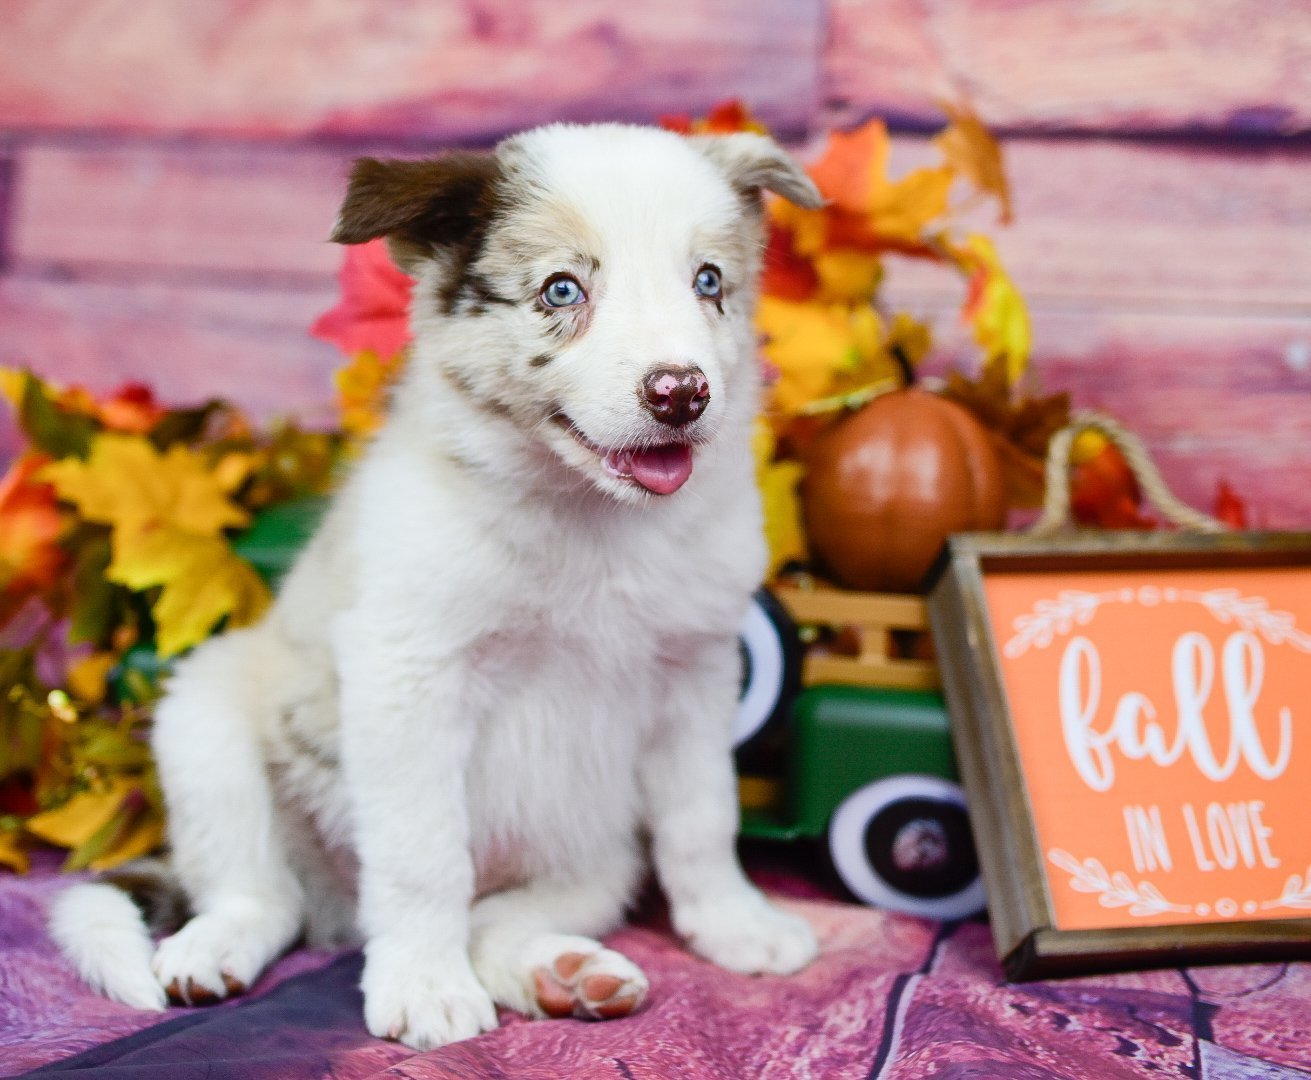 Fall in love with Quentin, a red merle border collie puppy